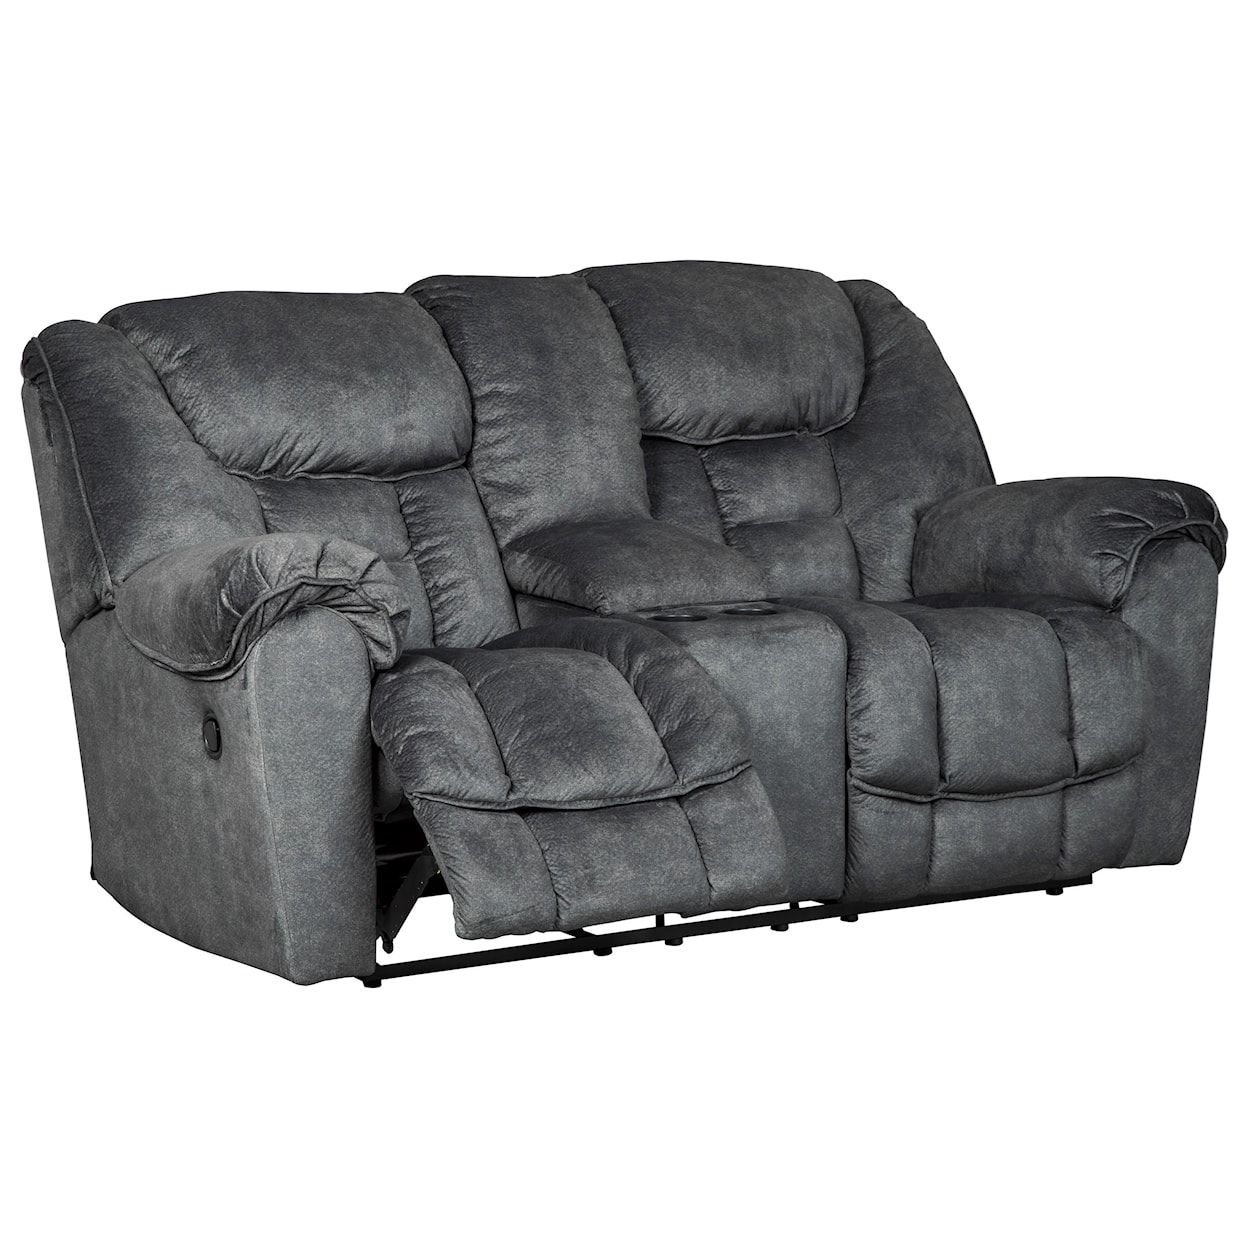 Signature Design by Ashley Capehorn Double Reclining Loveseat w/ Console